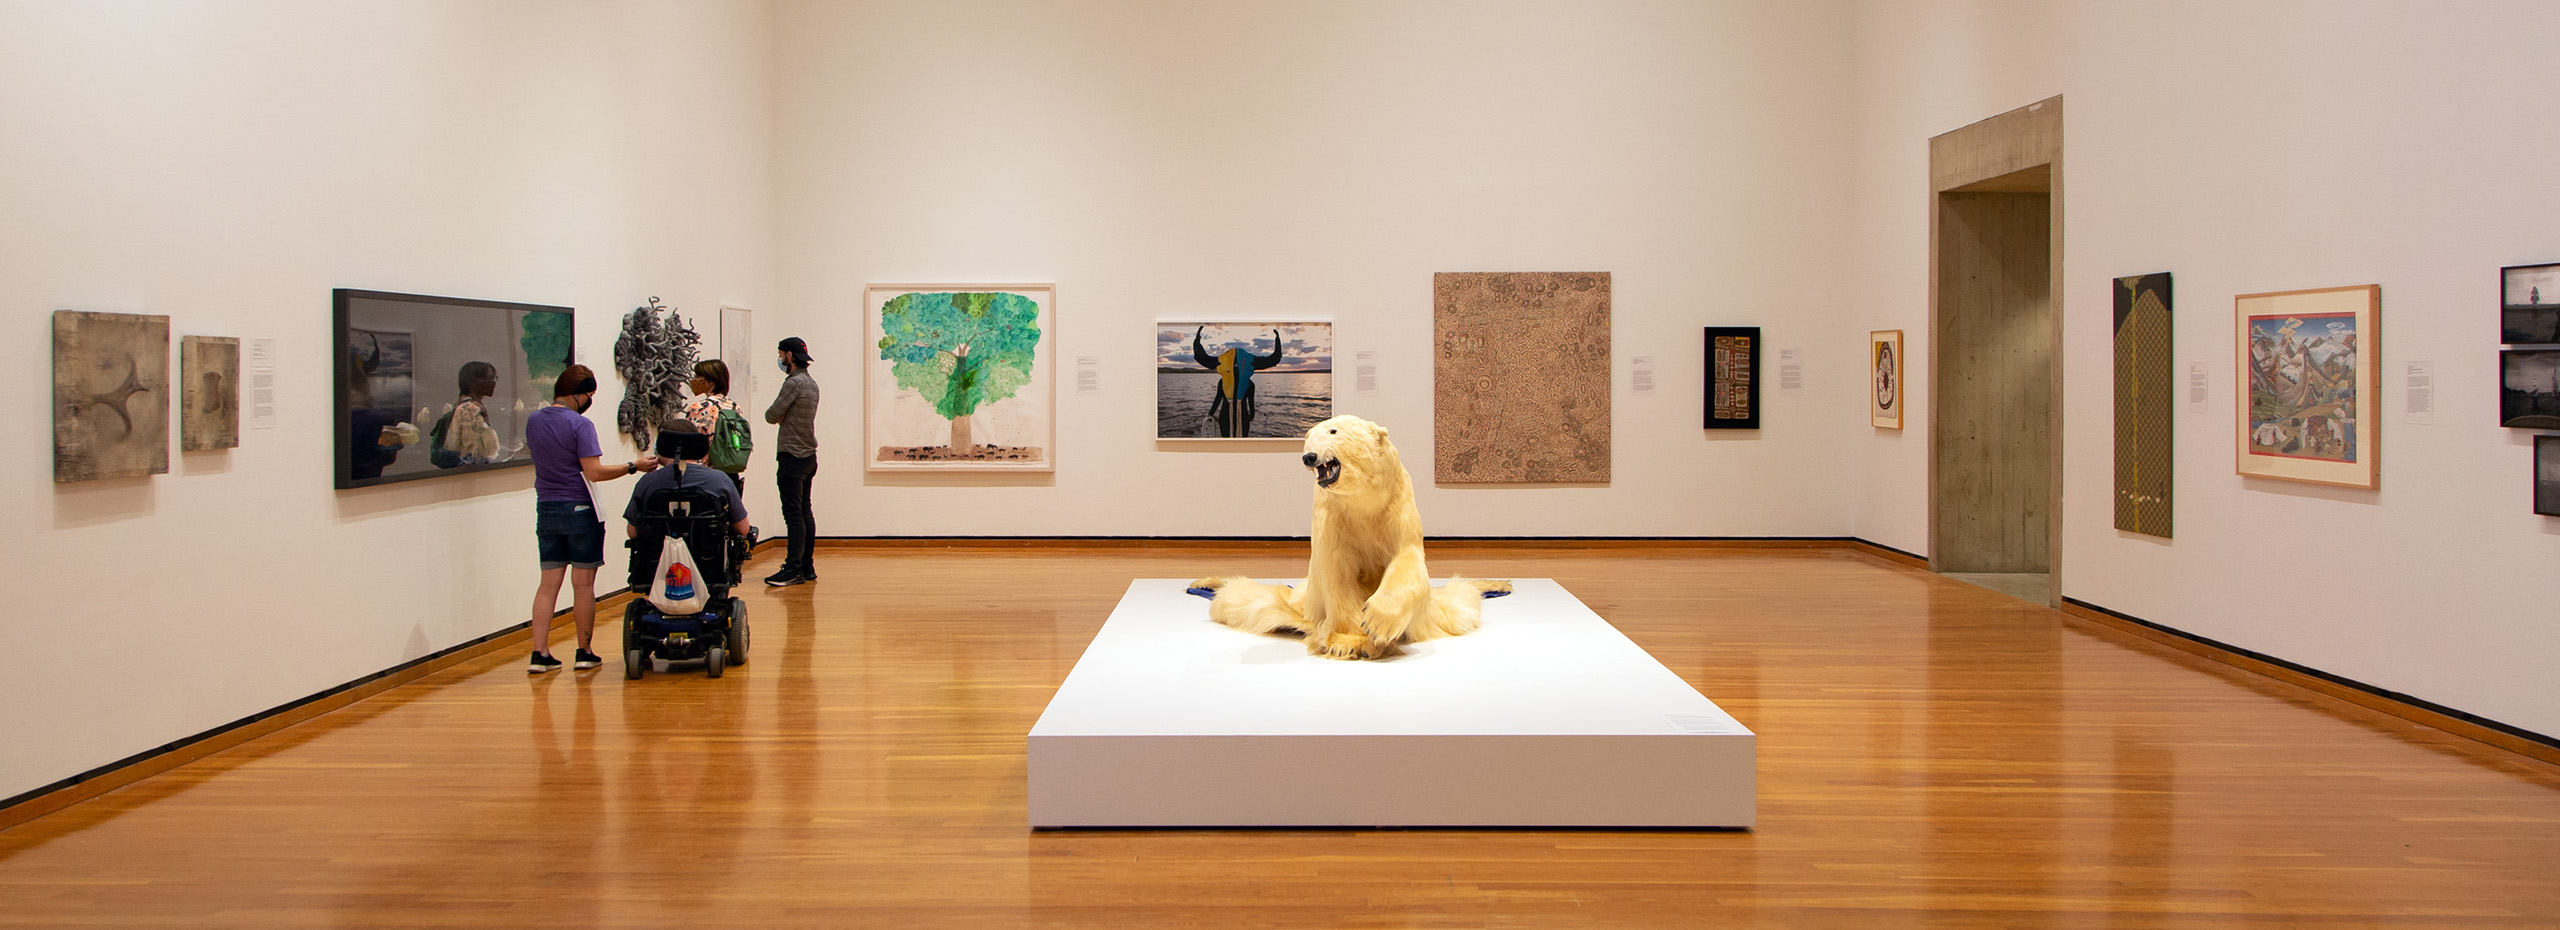 A large gallery of artworks and visitors also contains a taxidermied polar bear installation